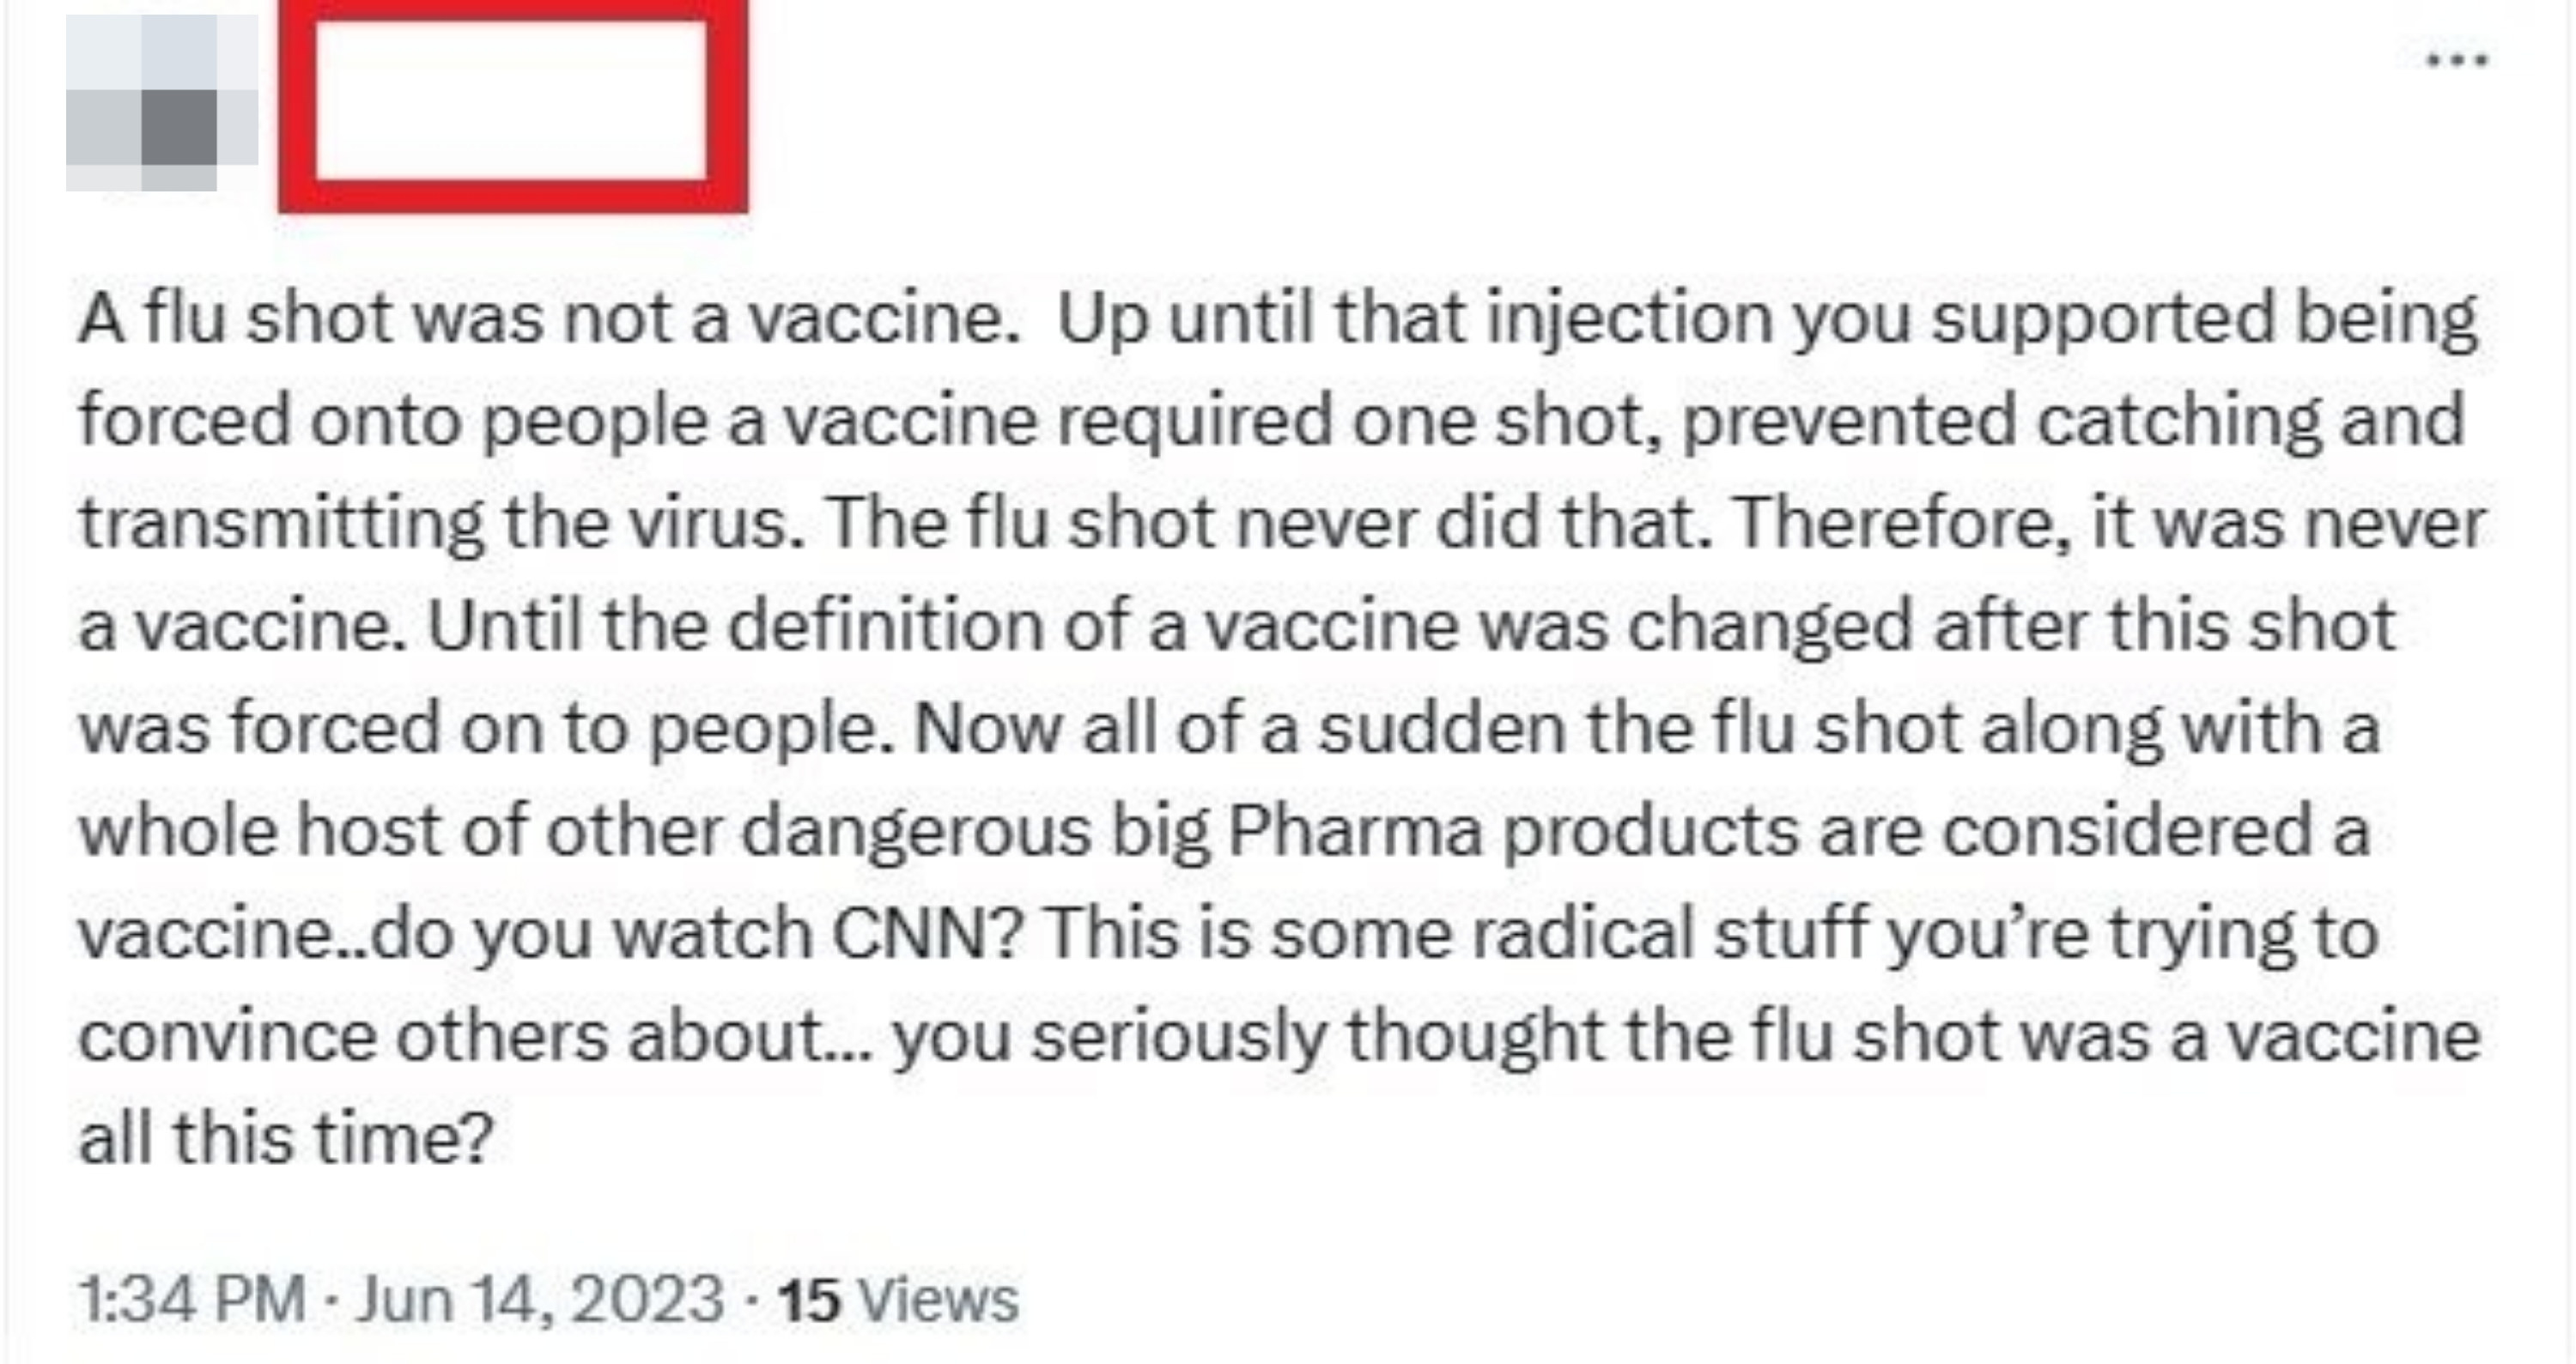 &quot;... you seriously thought the flu shot was a vaccine all this time?&quot;